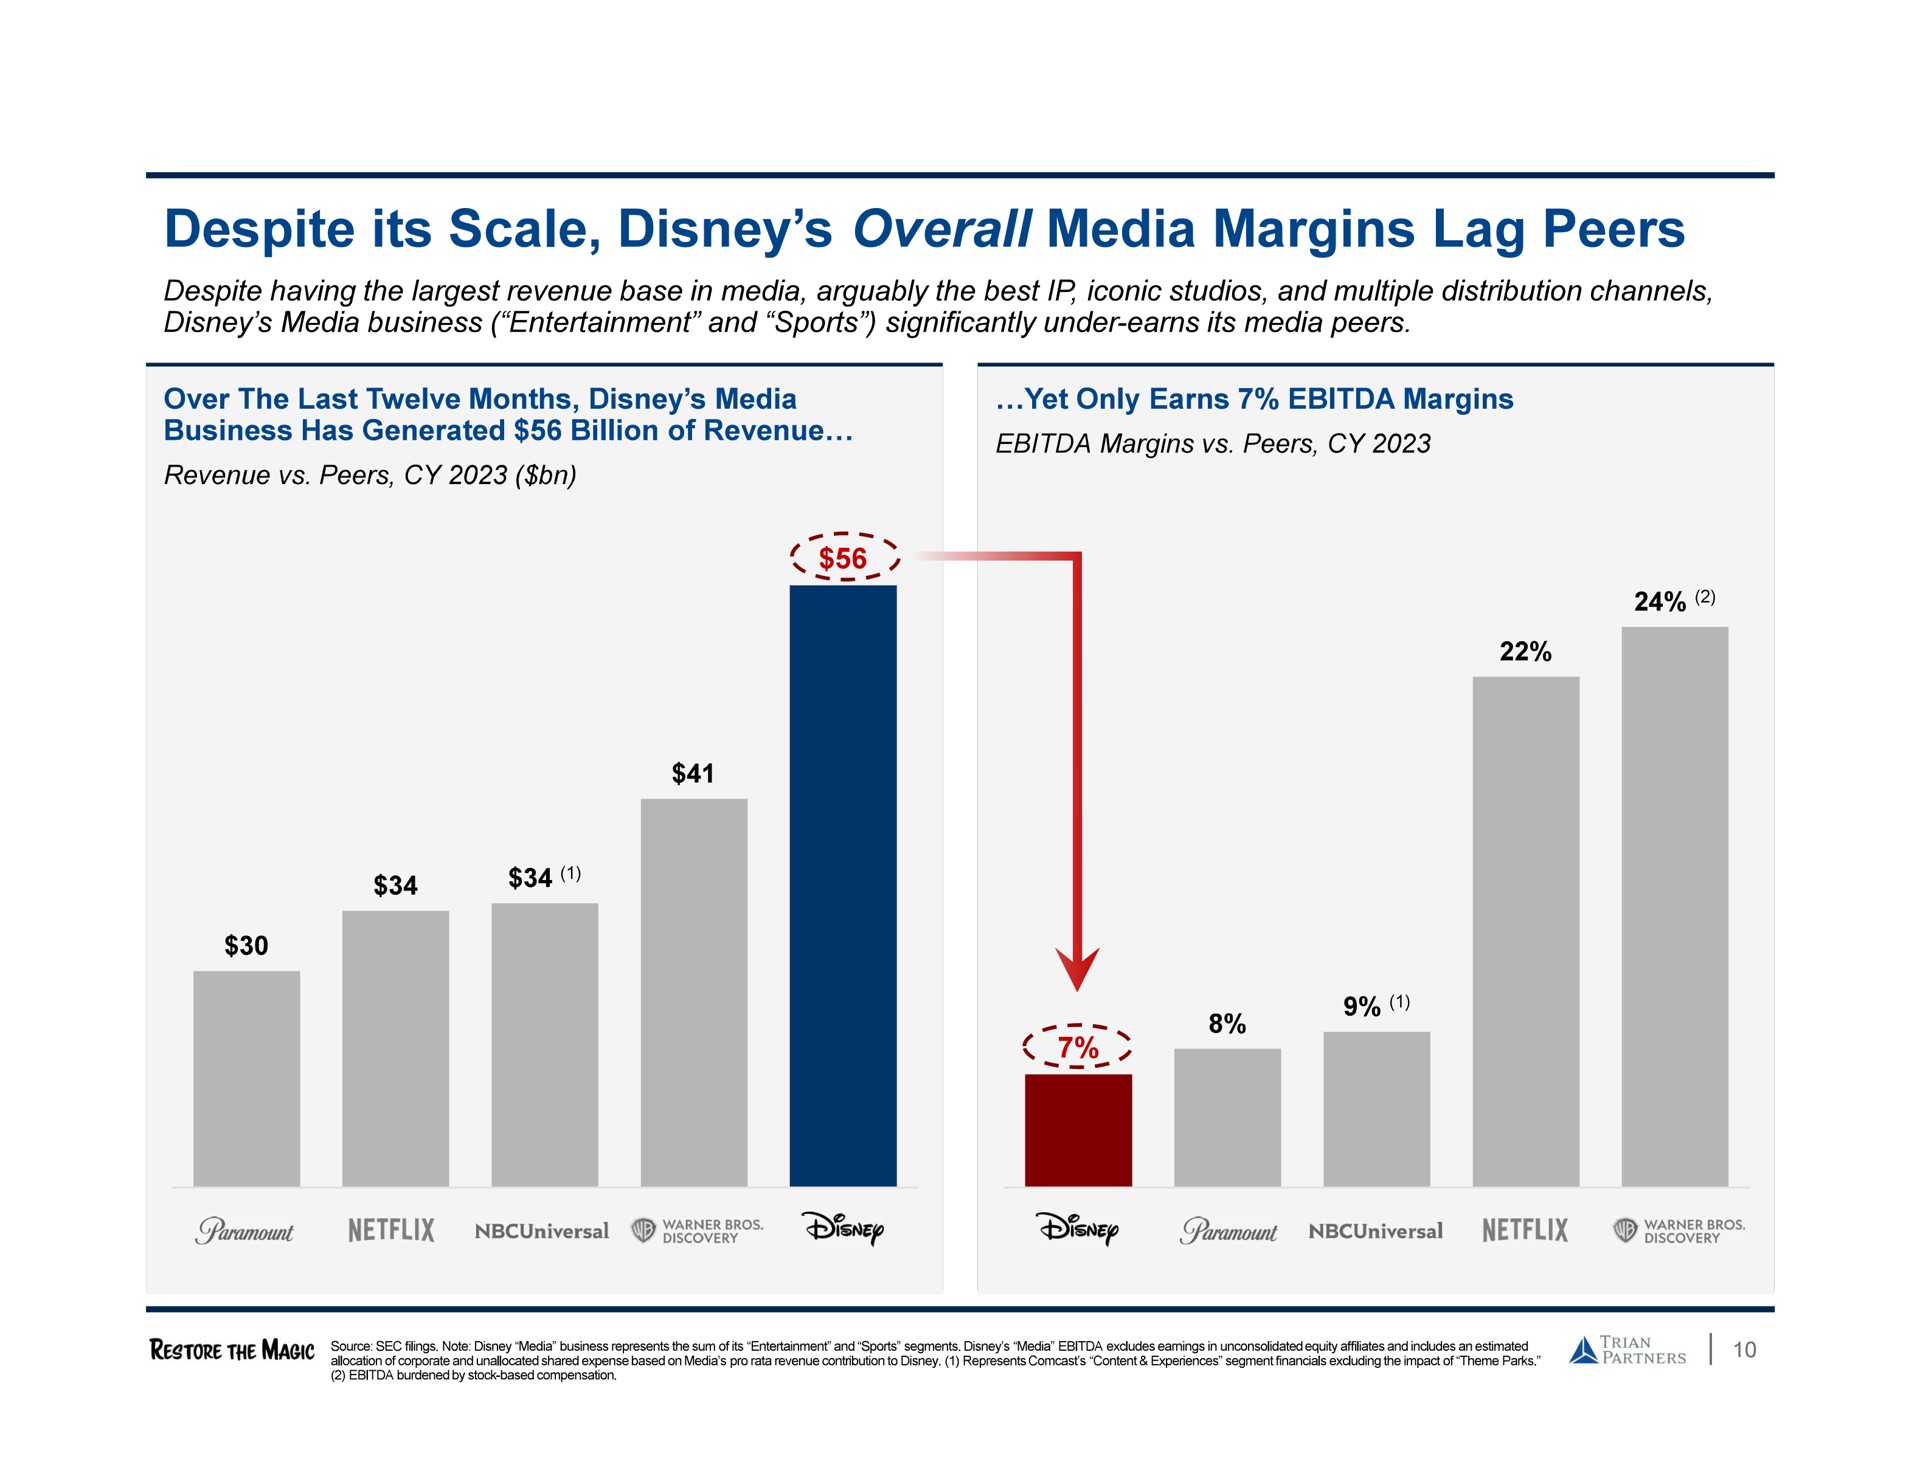 despite its scale overall media margins lag peers | Trian Partners